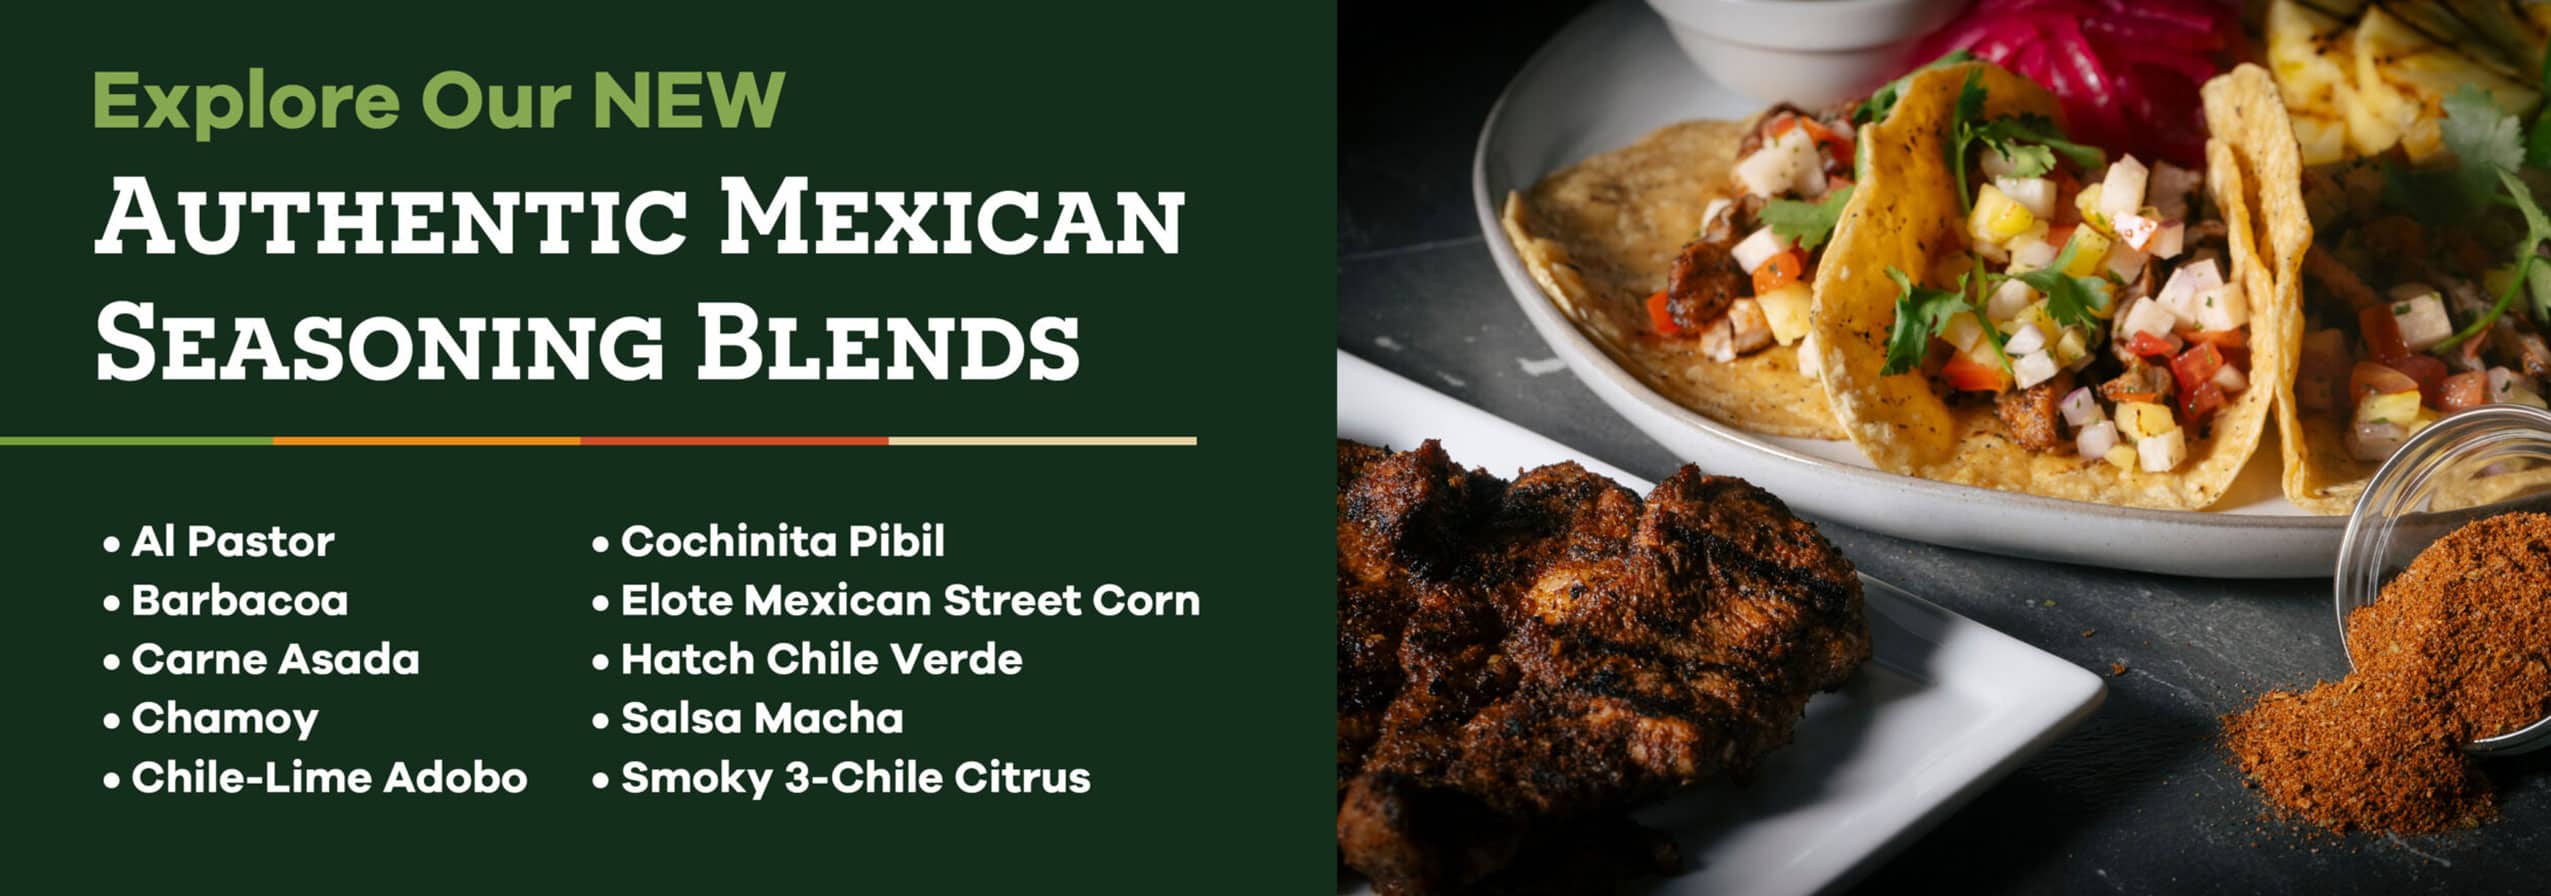 slide about authentic mexican seasoning blends with an image of tacos and marinated meat